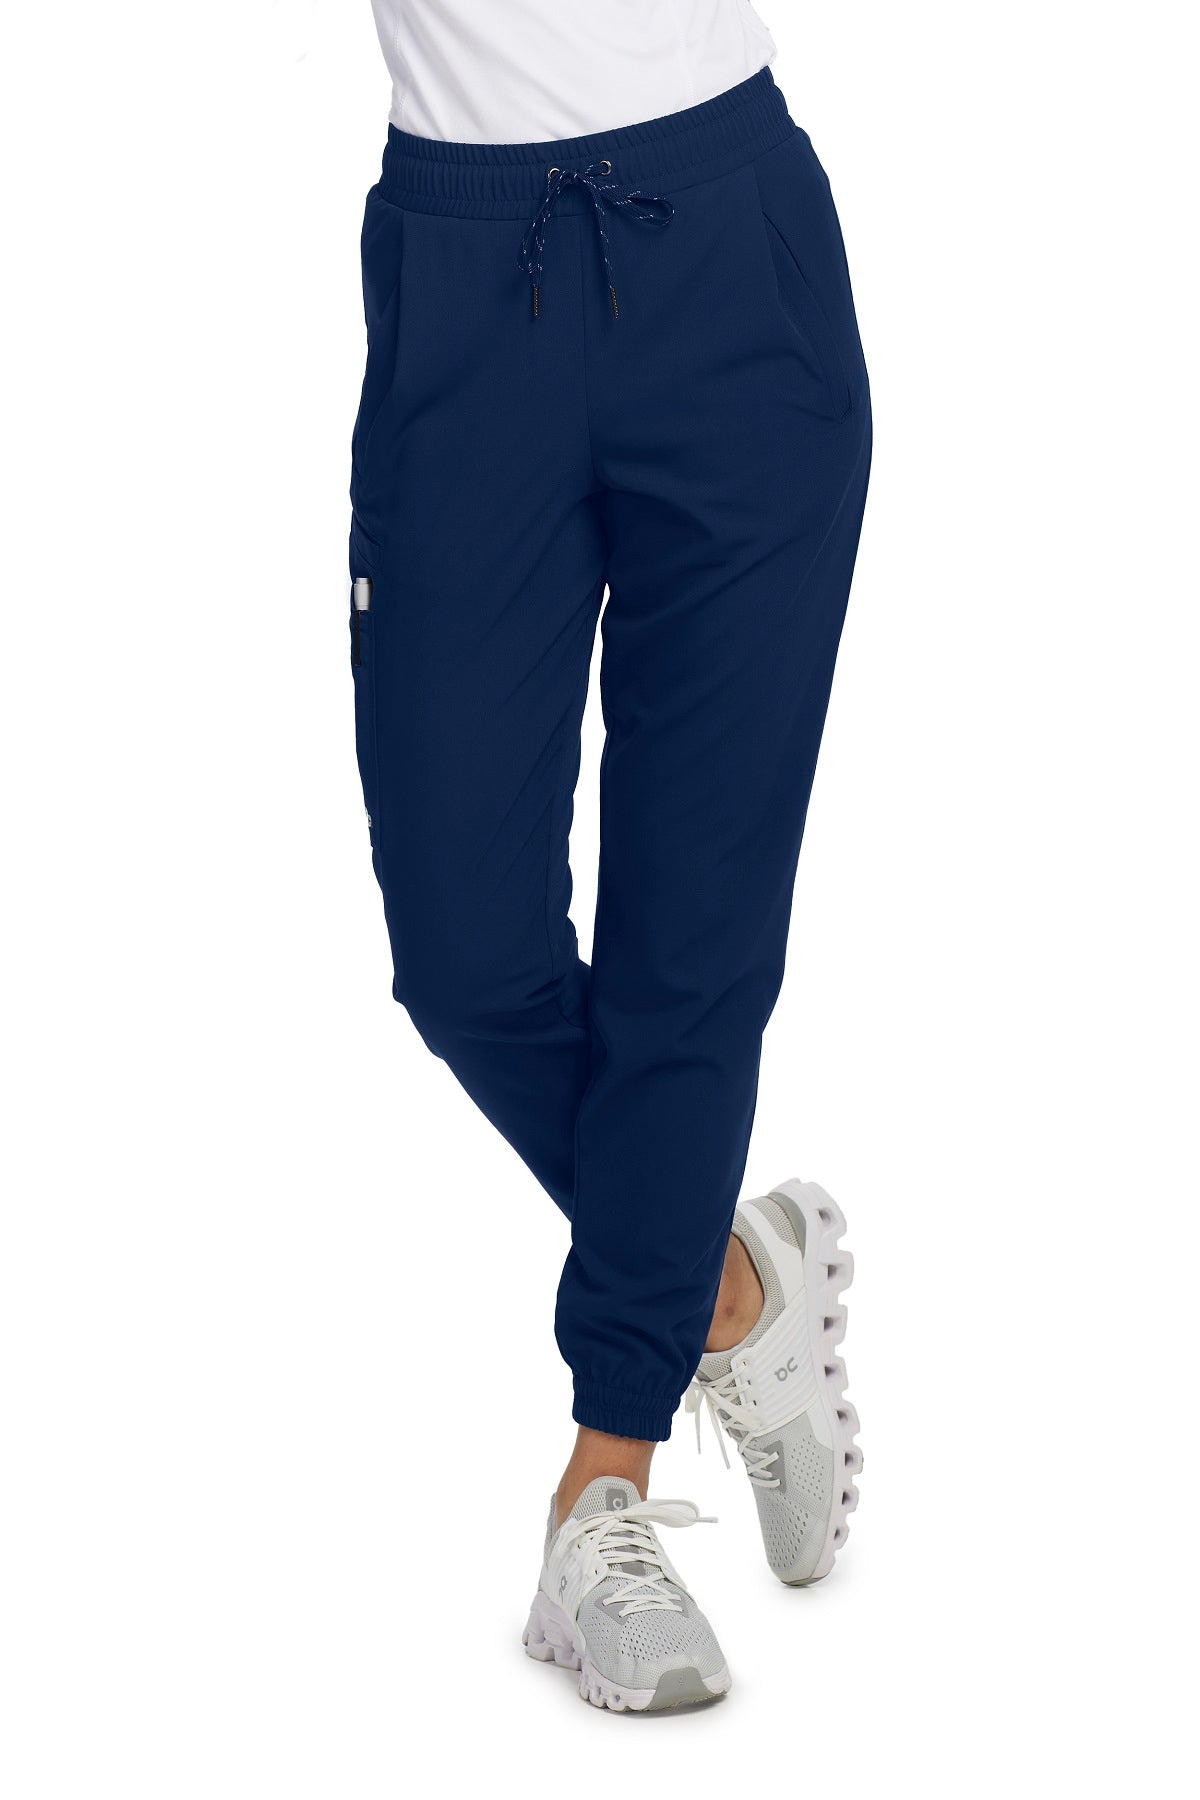 Barco Unify Scrub Pants Mission Jogger Regular Length in Indigo at Parker's Clothing and Shoes.